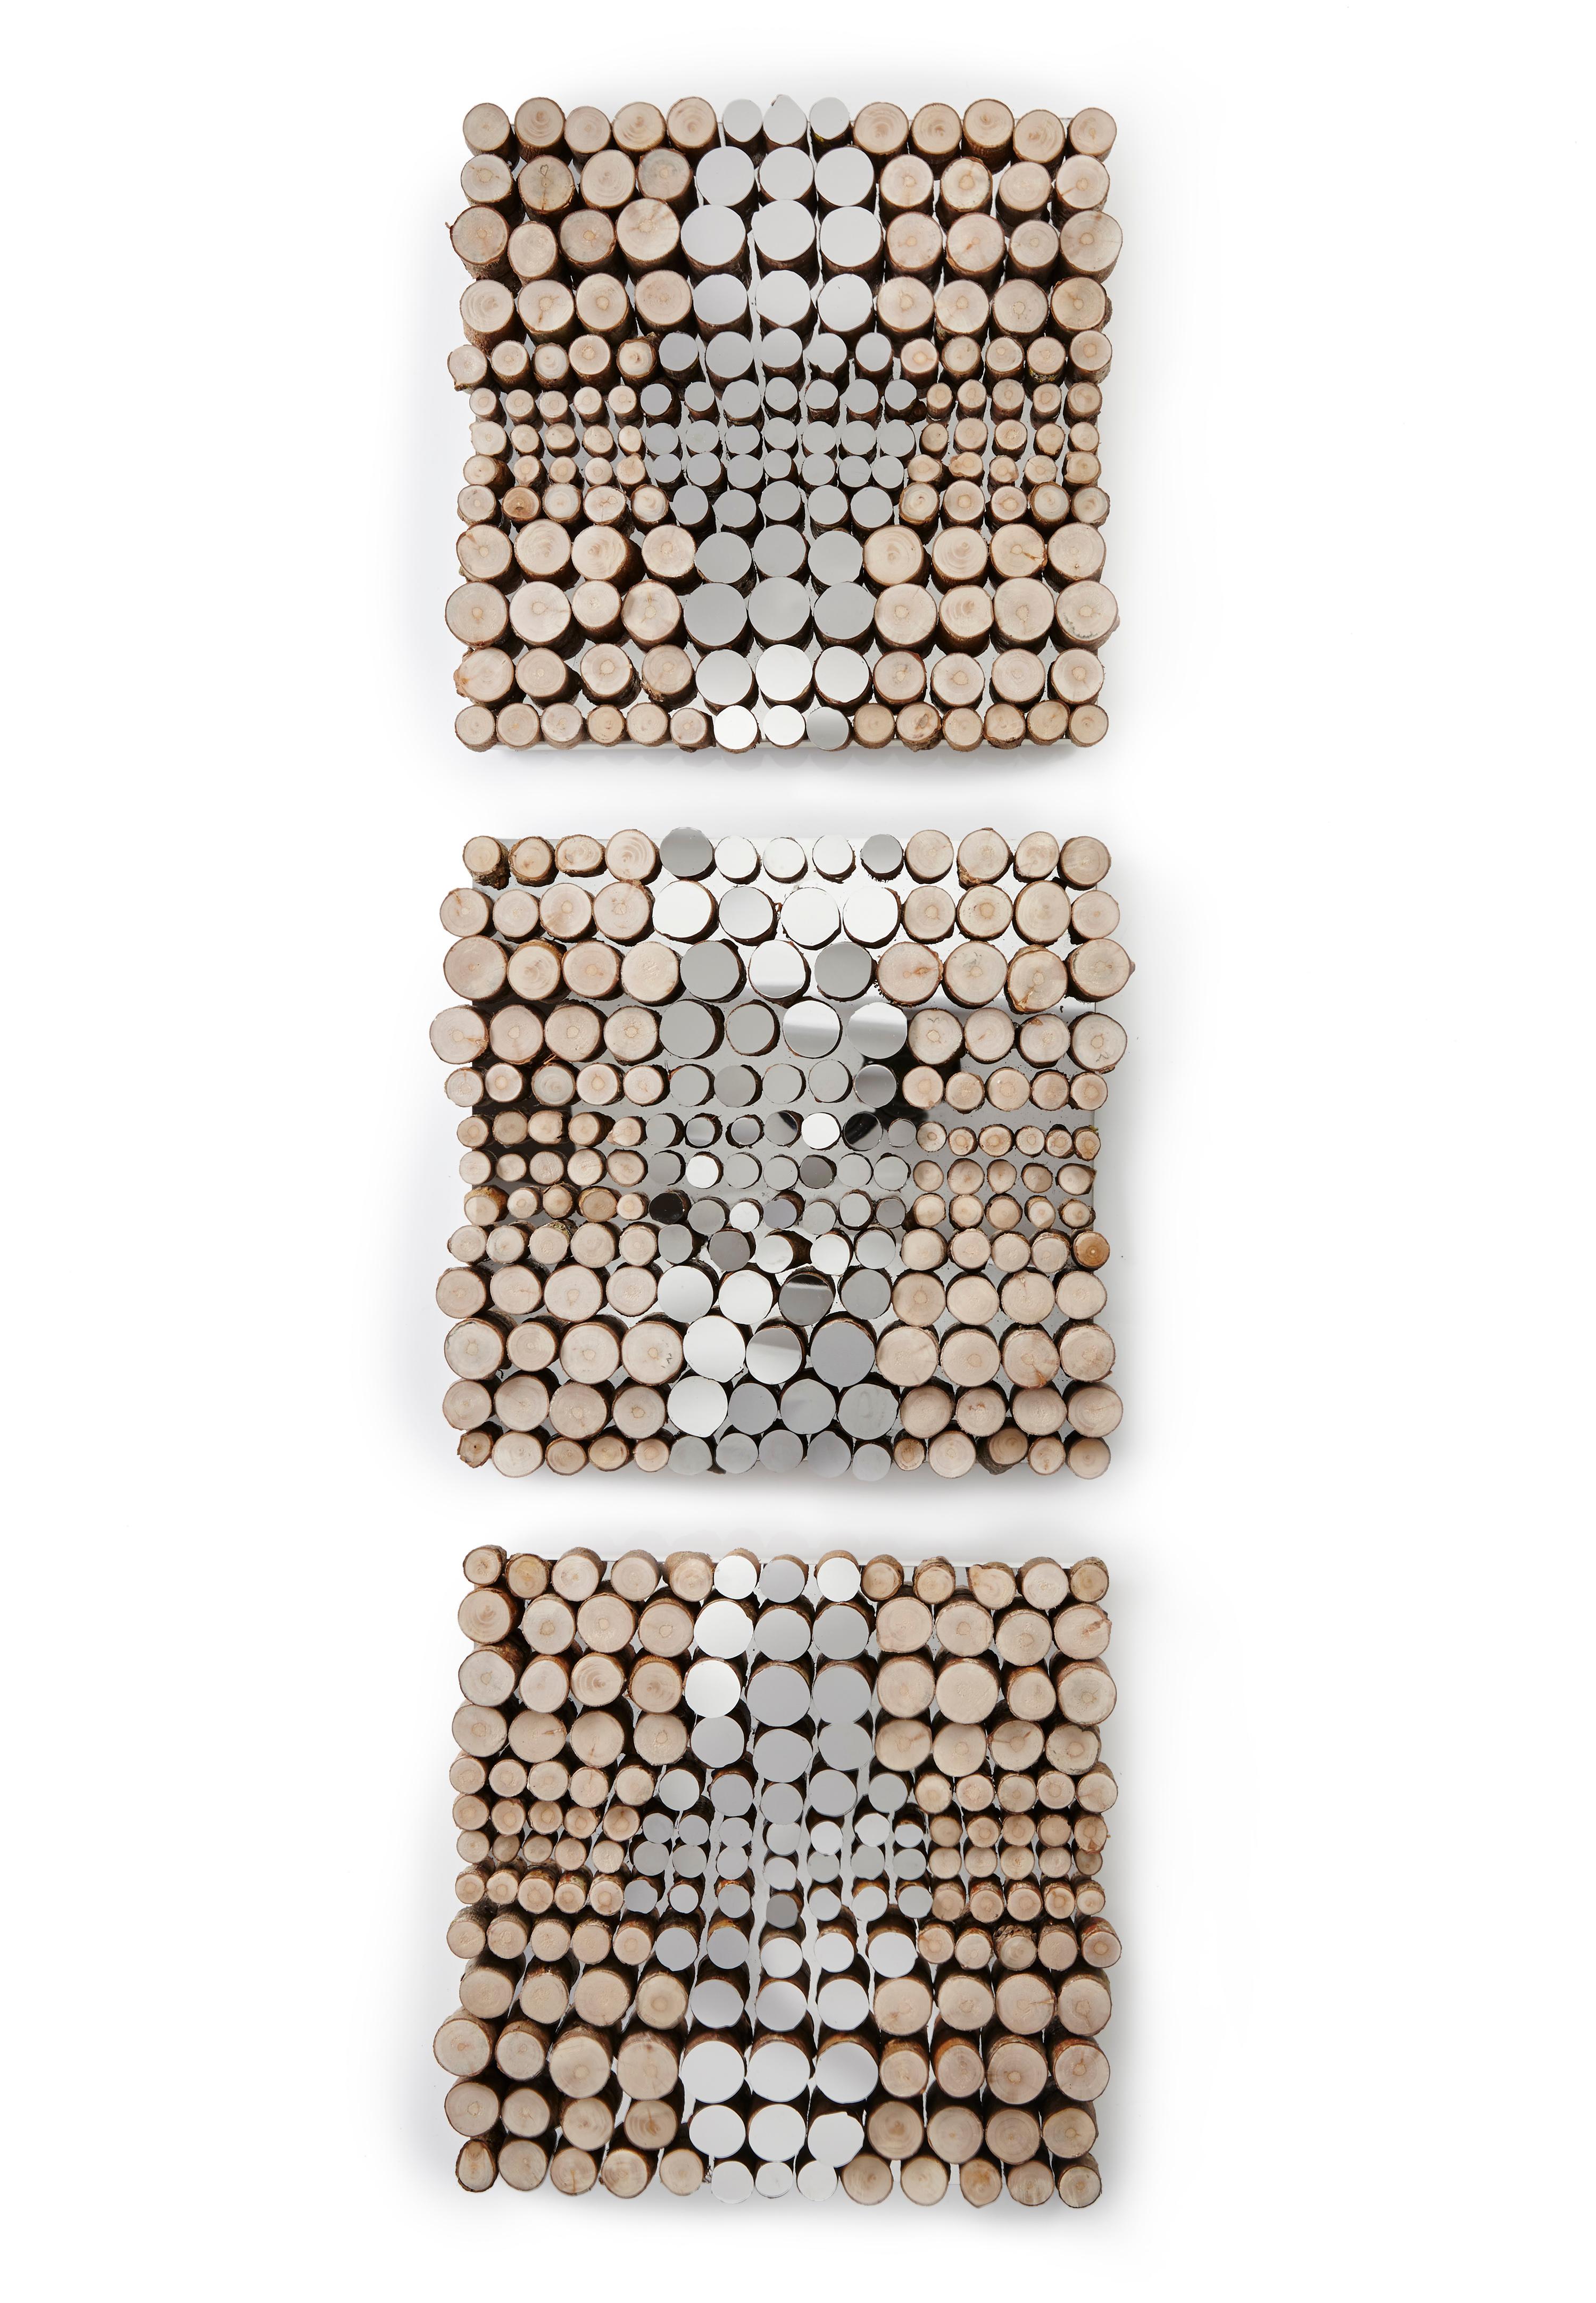 This is a sculptural wall piece, made from natural fallen willow wood and polished mirror steel.  The price shown is for a single piece but it can also work as a diptych or as a triptych hung vertically (as shown) or horizontally.  Please enquire if